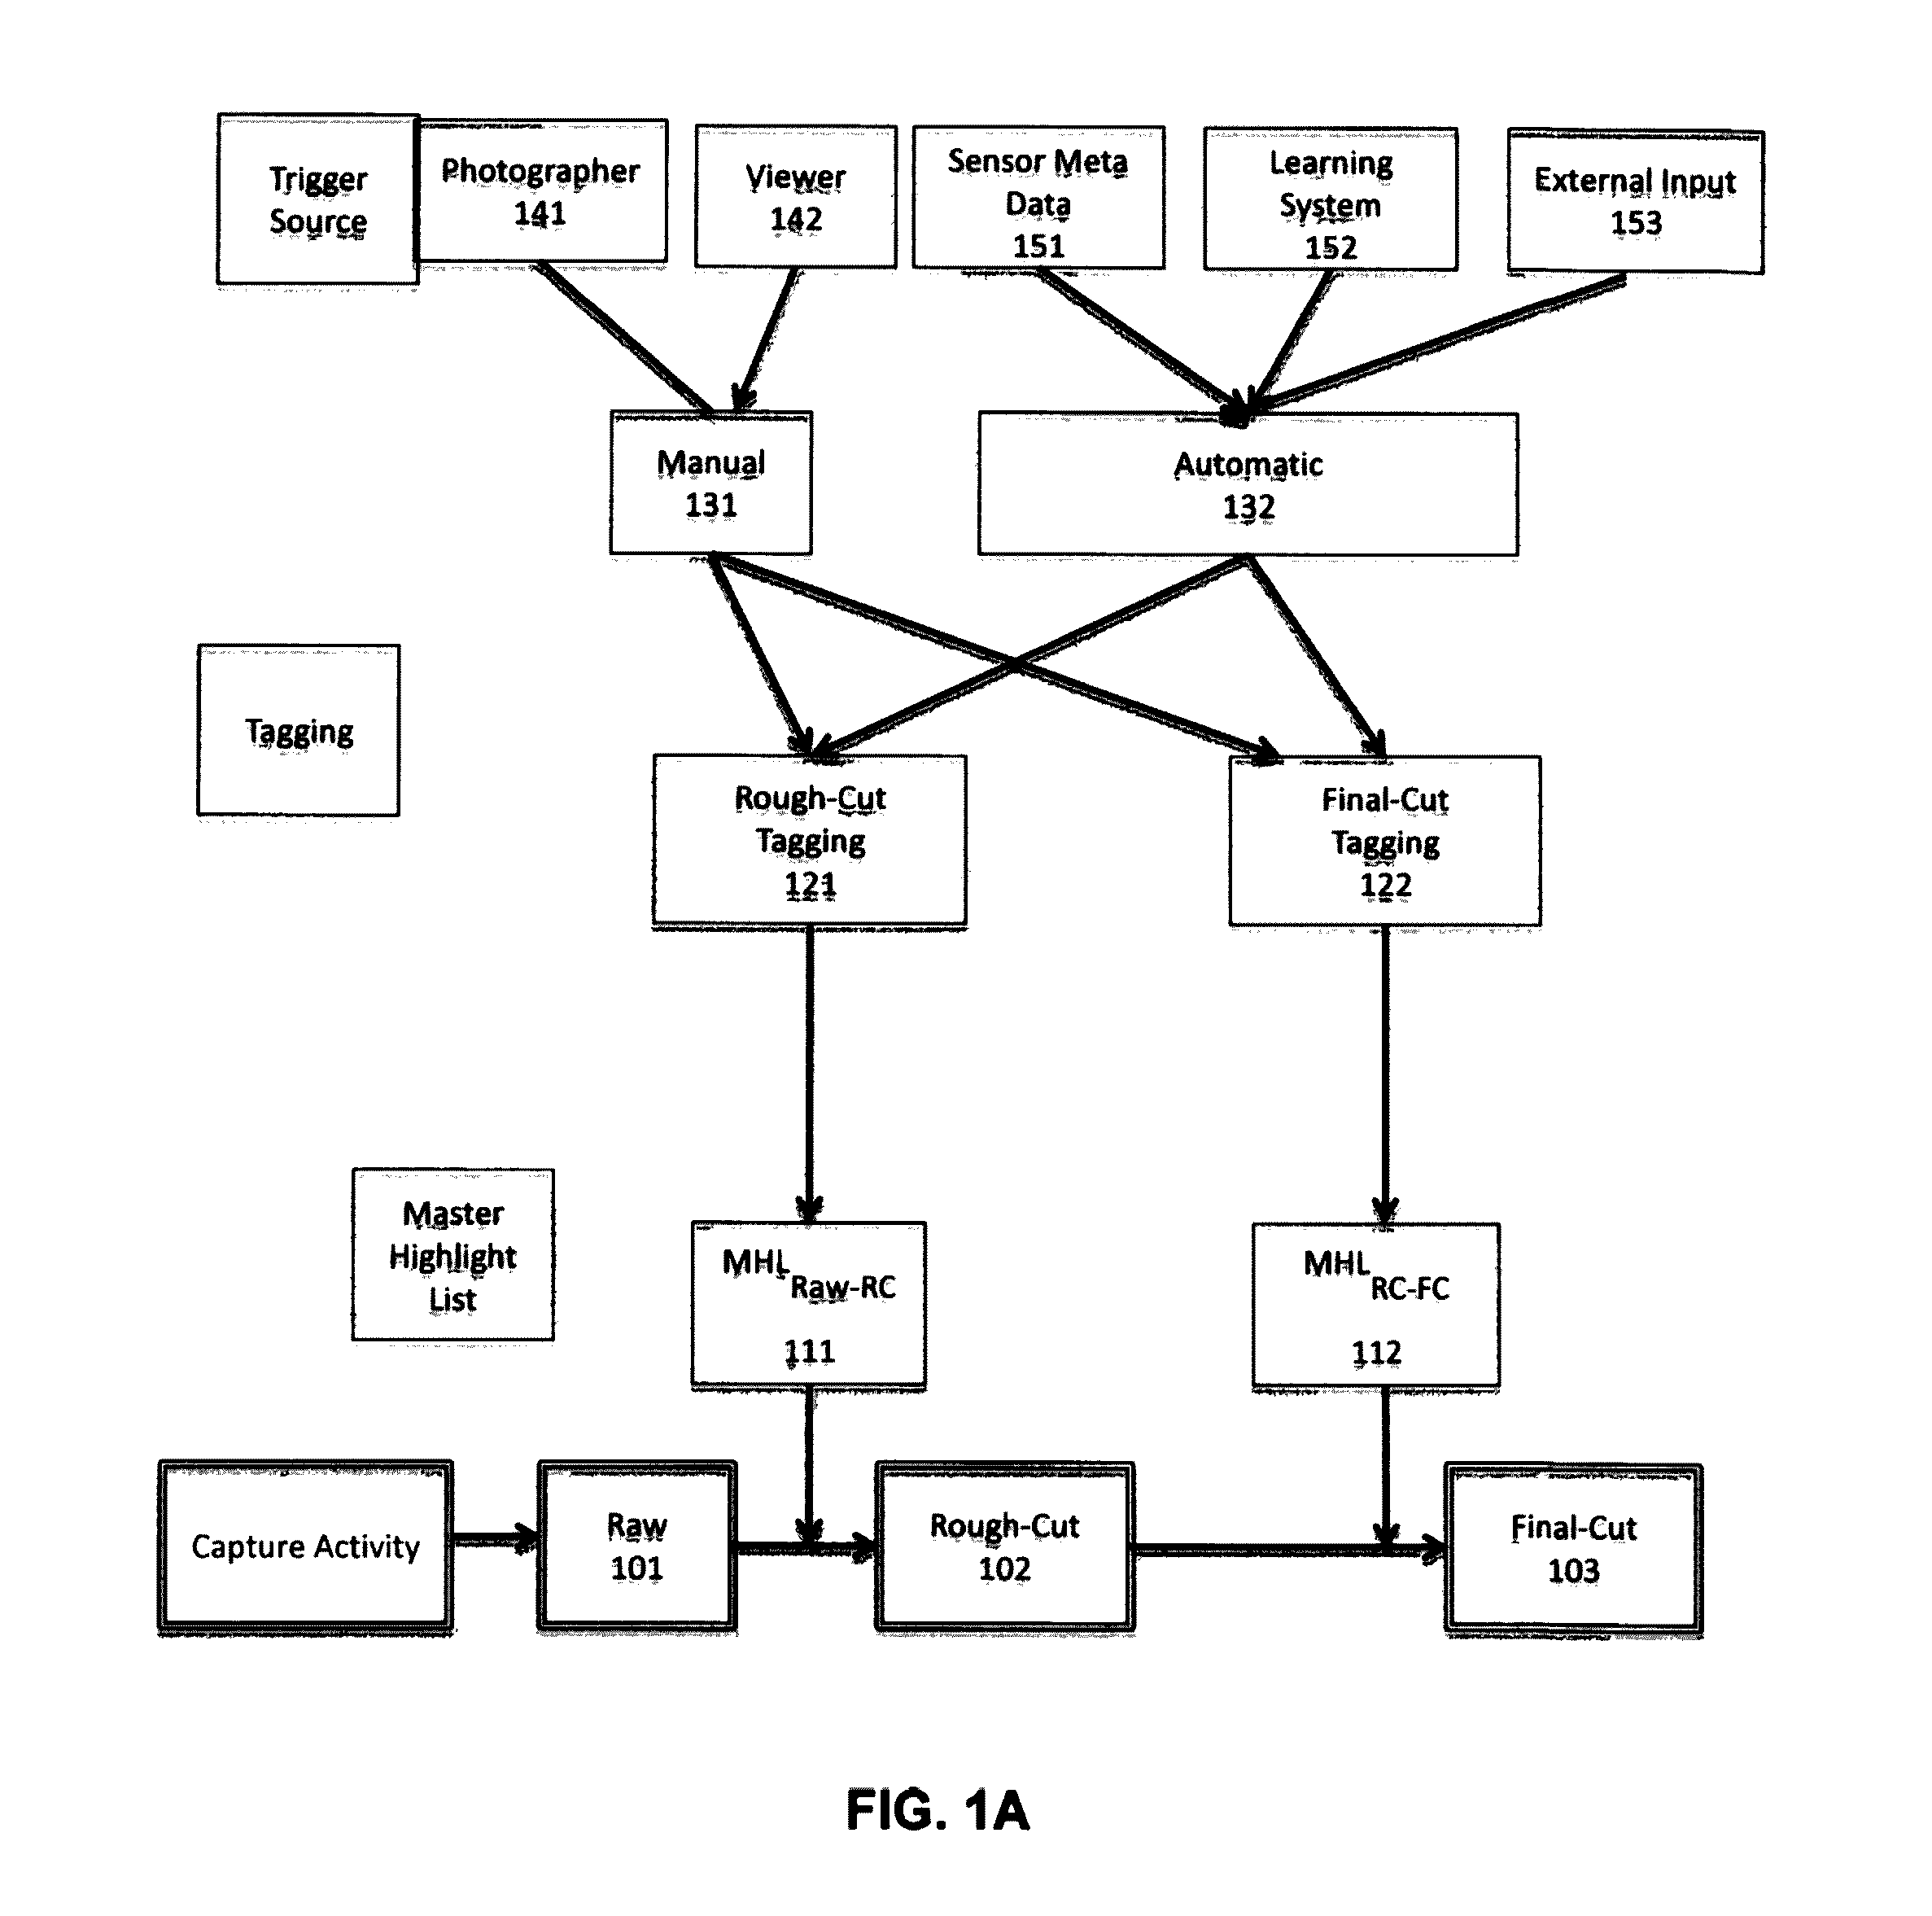 Apparatus for processing captured video data based on capture device orientation